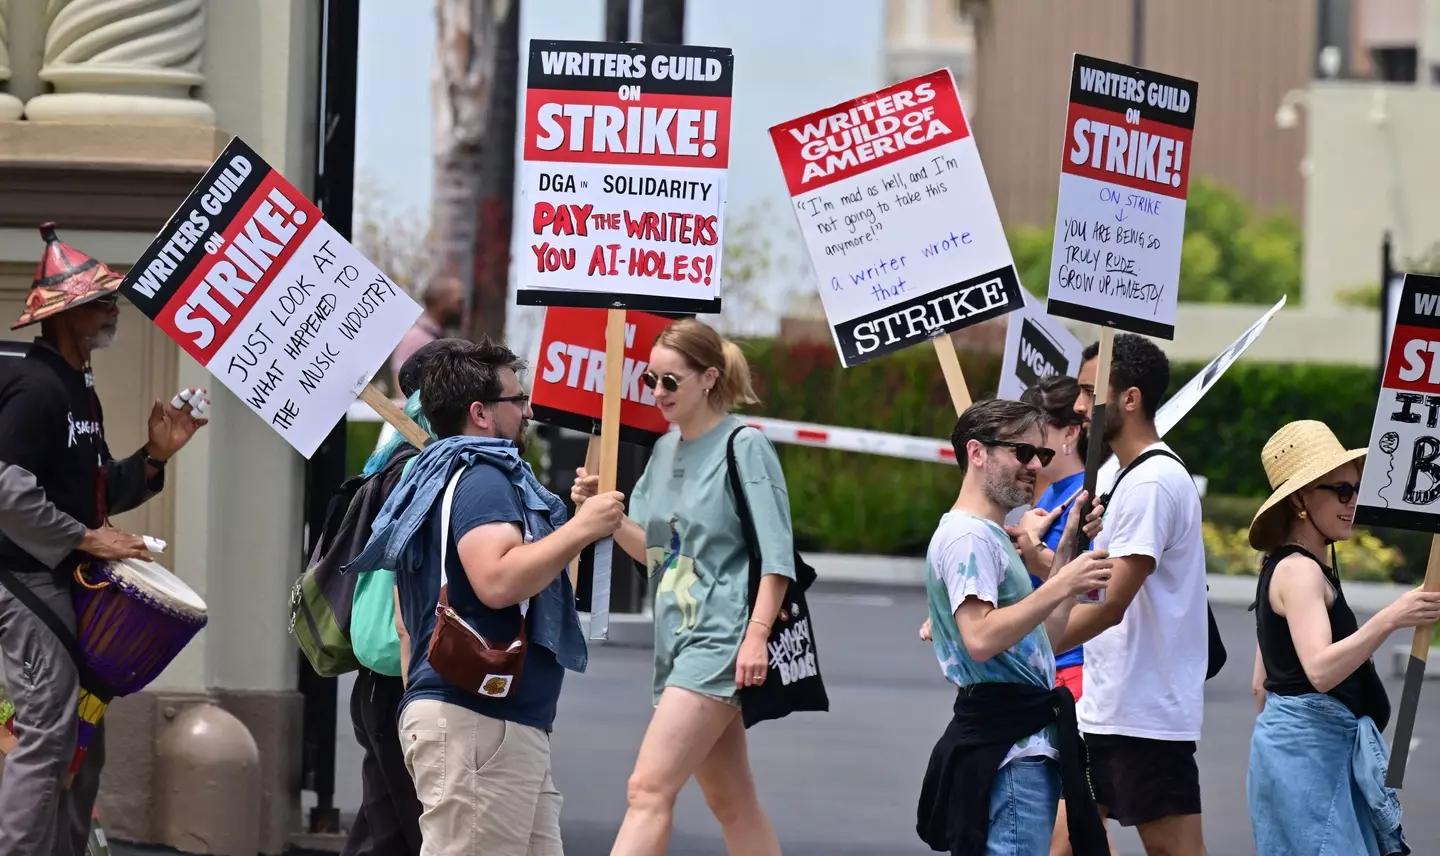 Writers have been striking for months over fair wages.